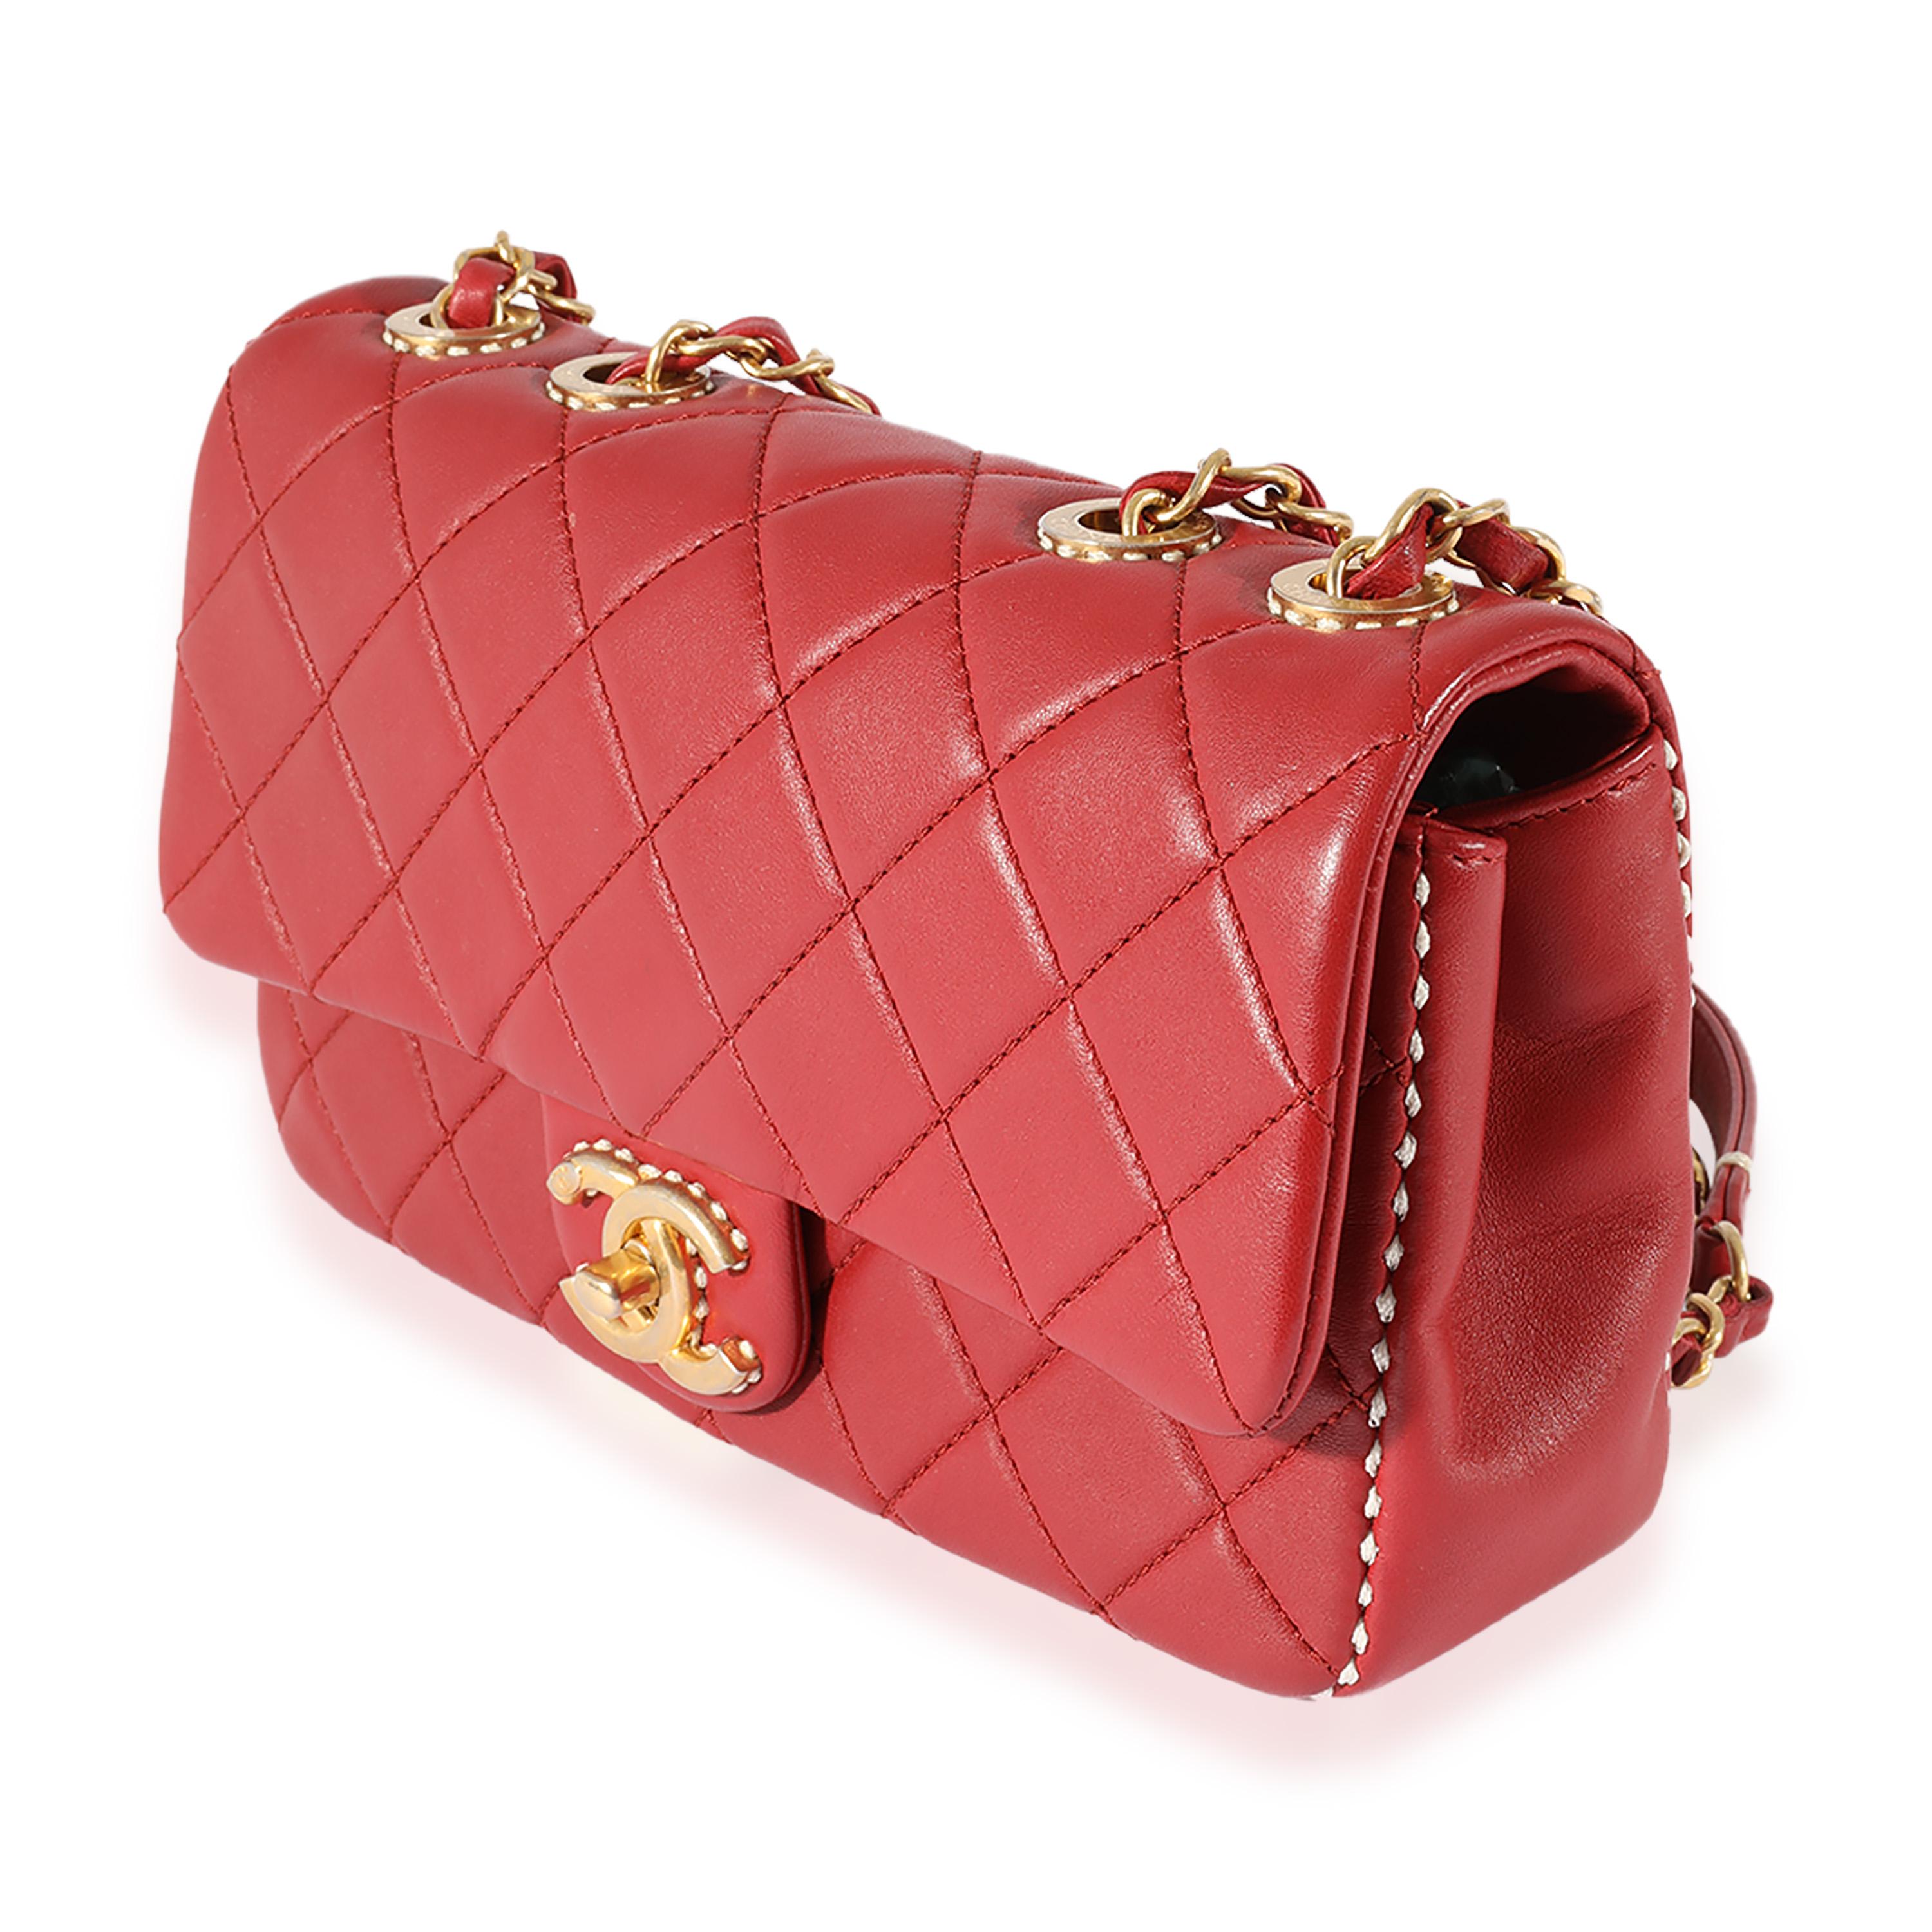 Women's Chanel Red Quilted Leather White Stitch Flap Bag